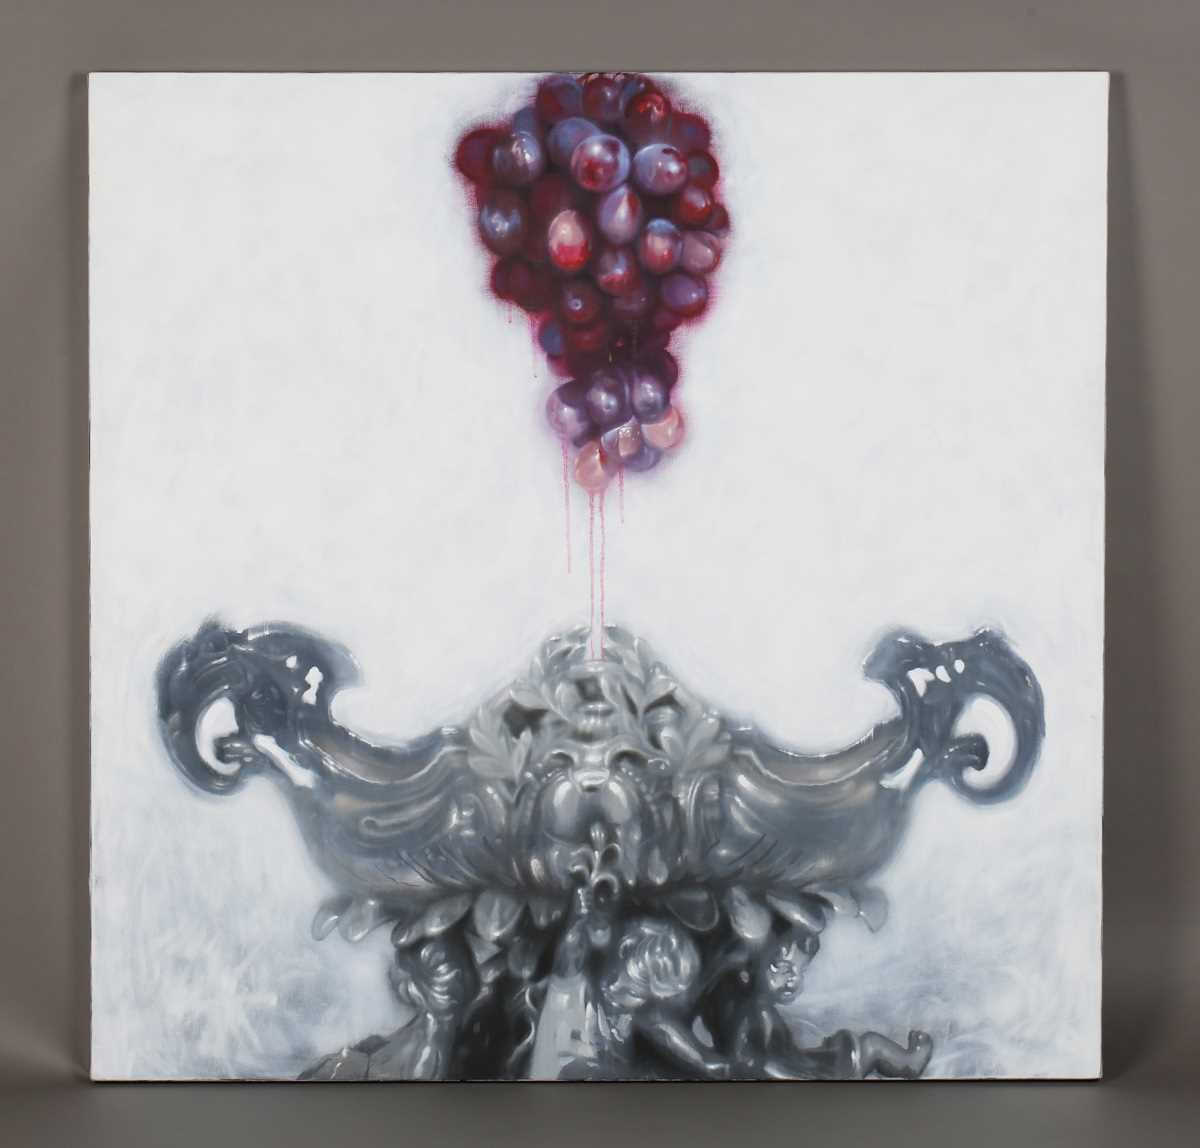 Chris Kettle – ‘Attacco’ (Still Life with Grapes and Silverware), oil on canvas, signed and dated - Image 2 of 6